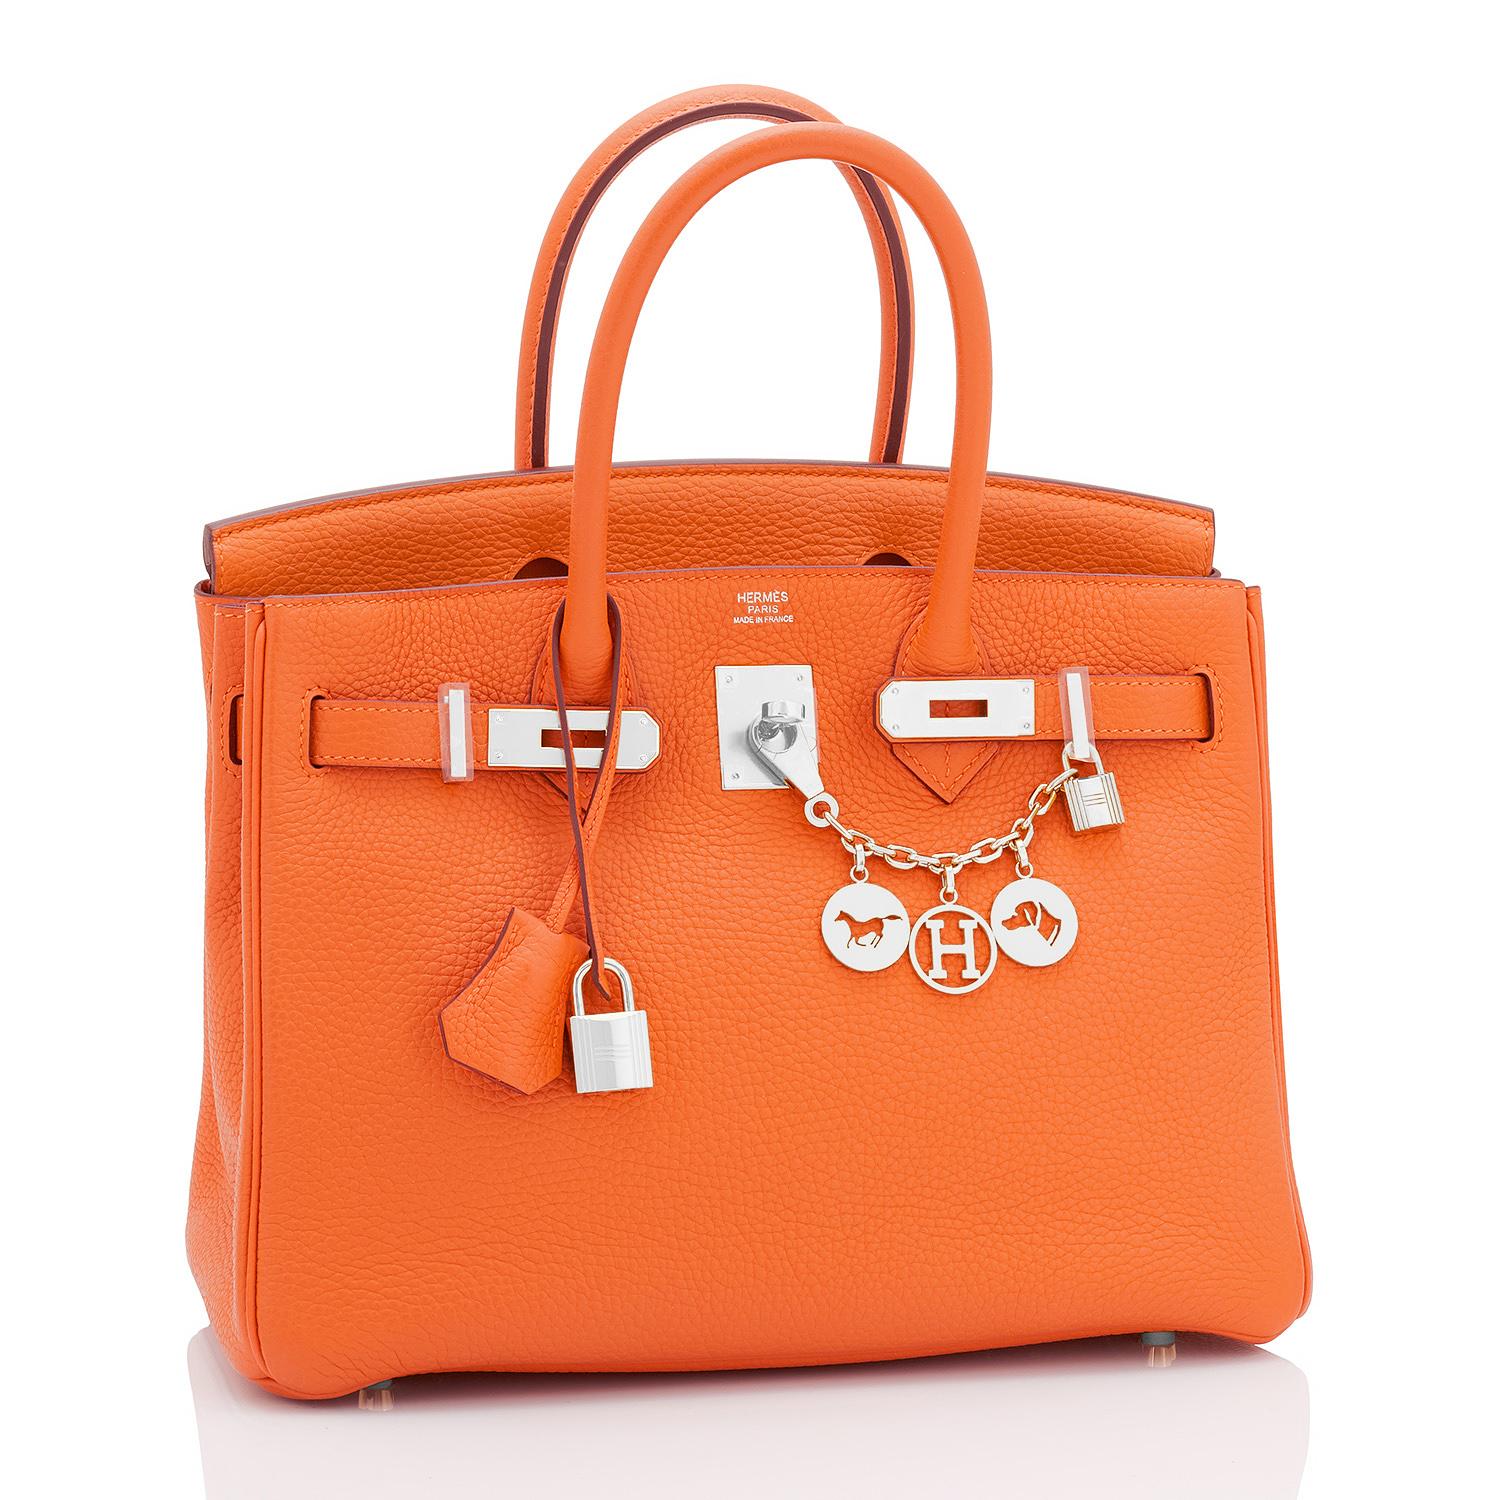 BANK WIRE PRICE ONLY
Hermes Birkin 30 Classic Hermes Orange Birkin U Stamp, 2022 
Ultra coveted and ultra rare combination- classic Hermes Orange has been out of production for many years!
Just purchased from Hermes store; bag bears new interior